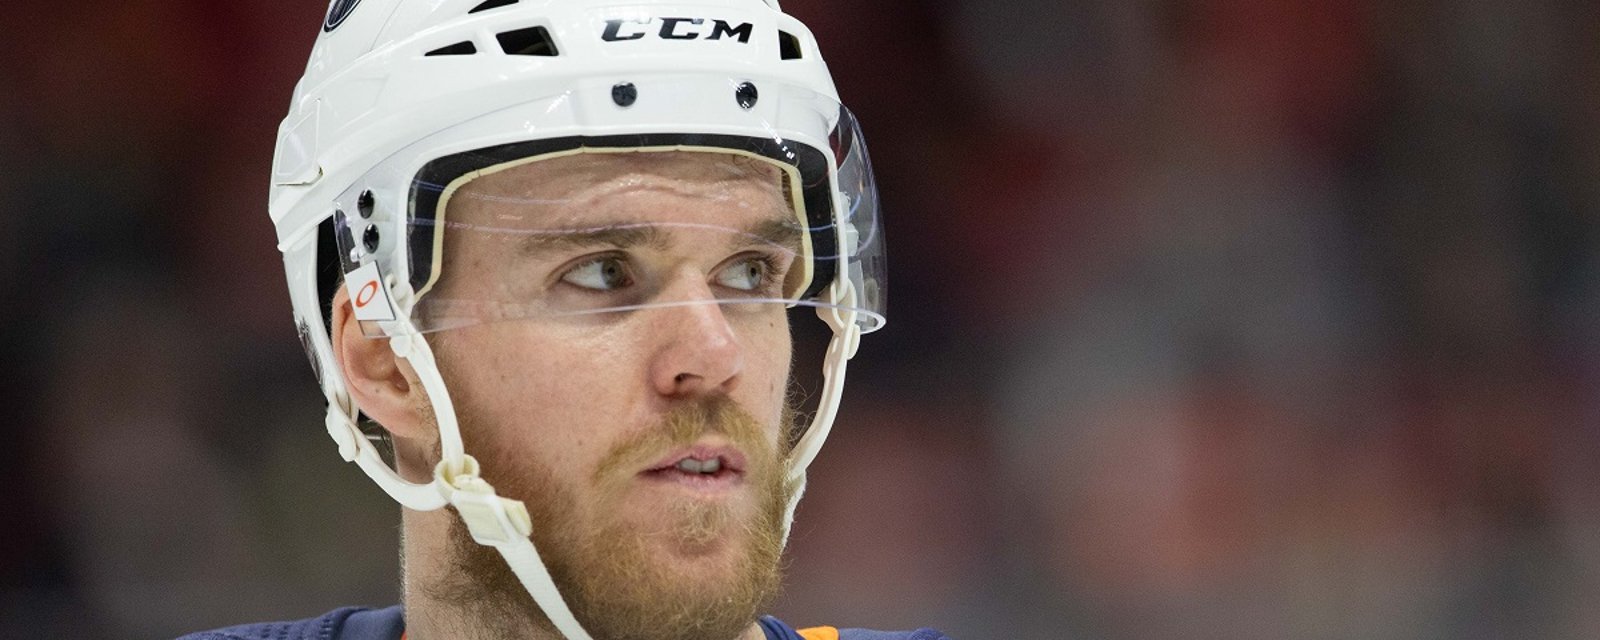 NHL insiders share a difference of opinion on the likelihood of a McDavid trade demand.